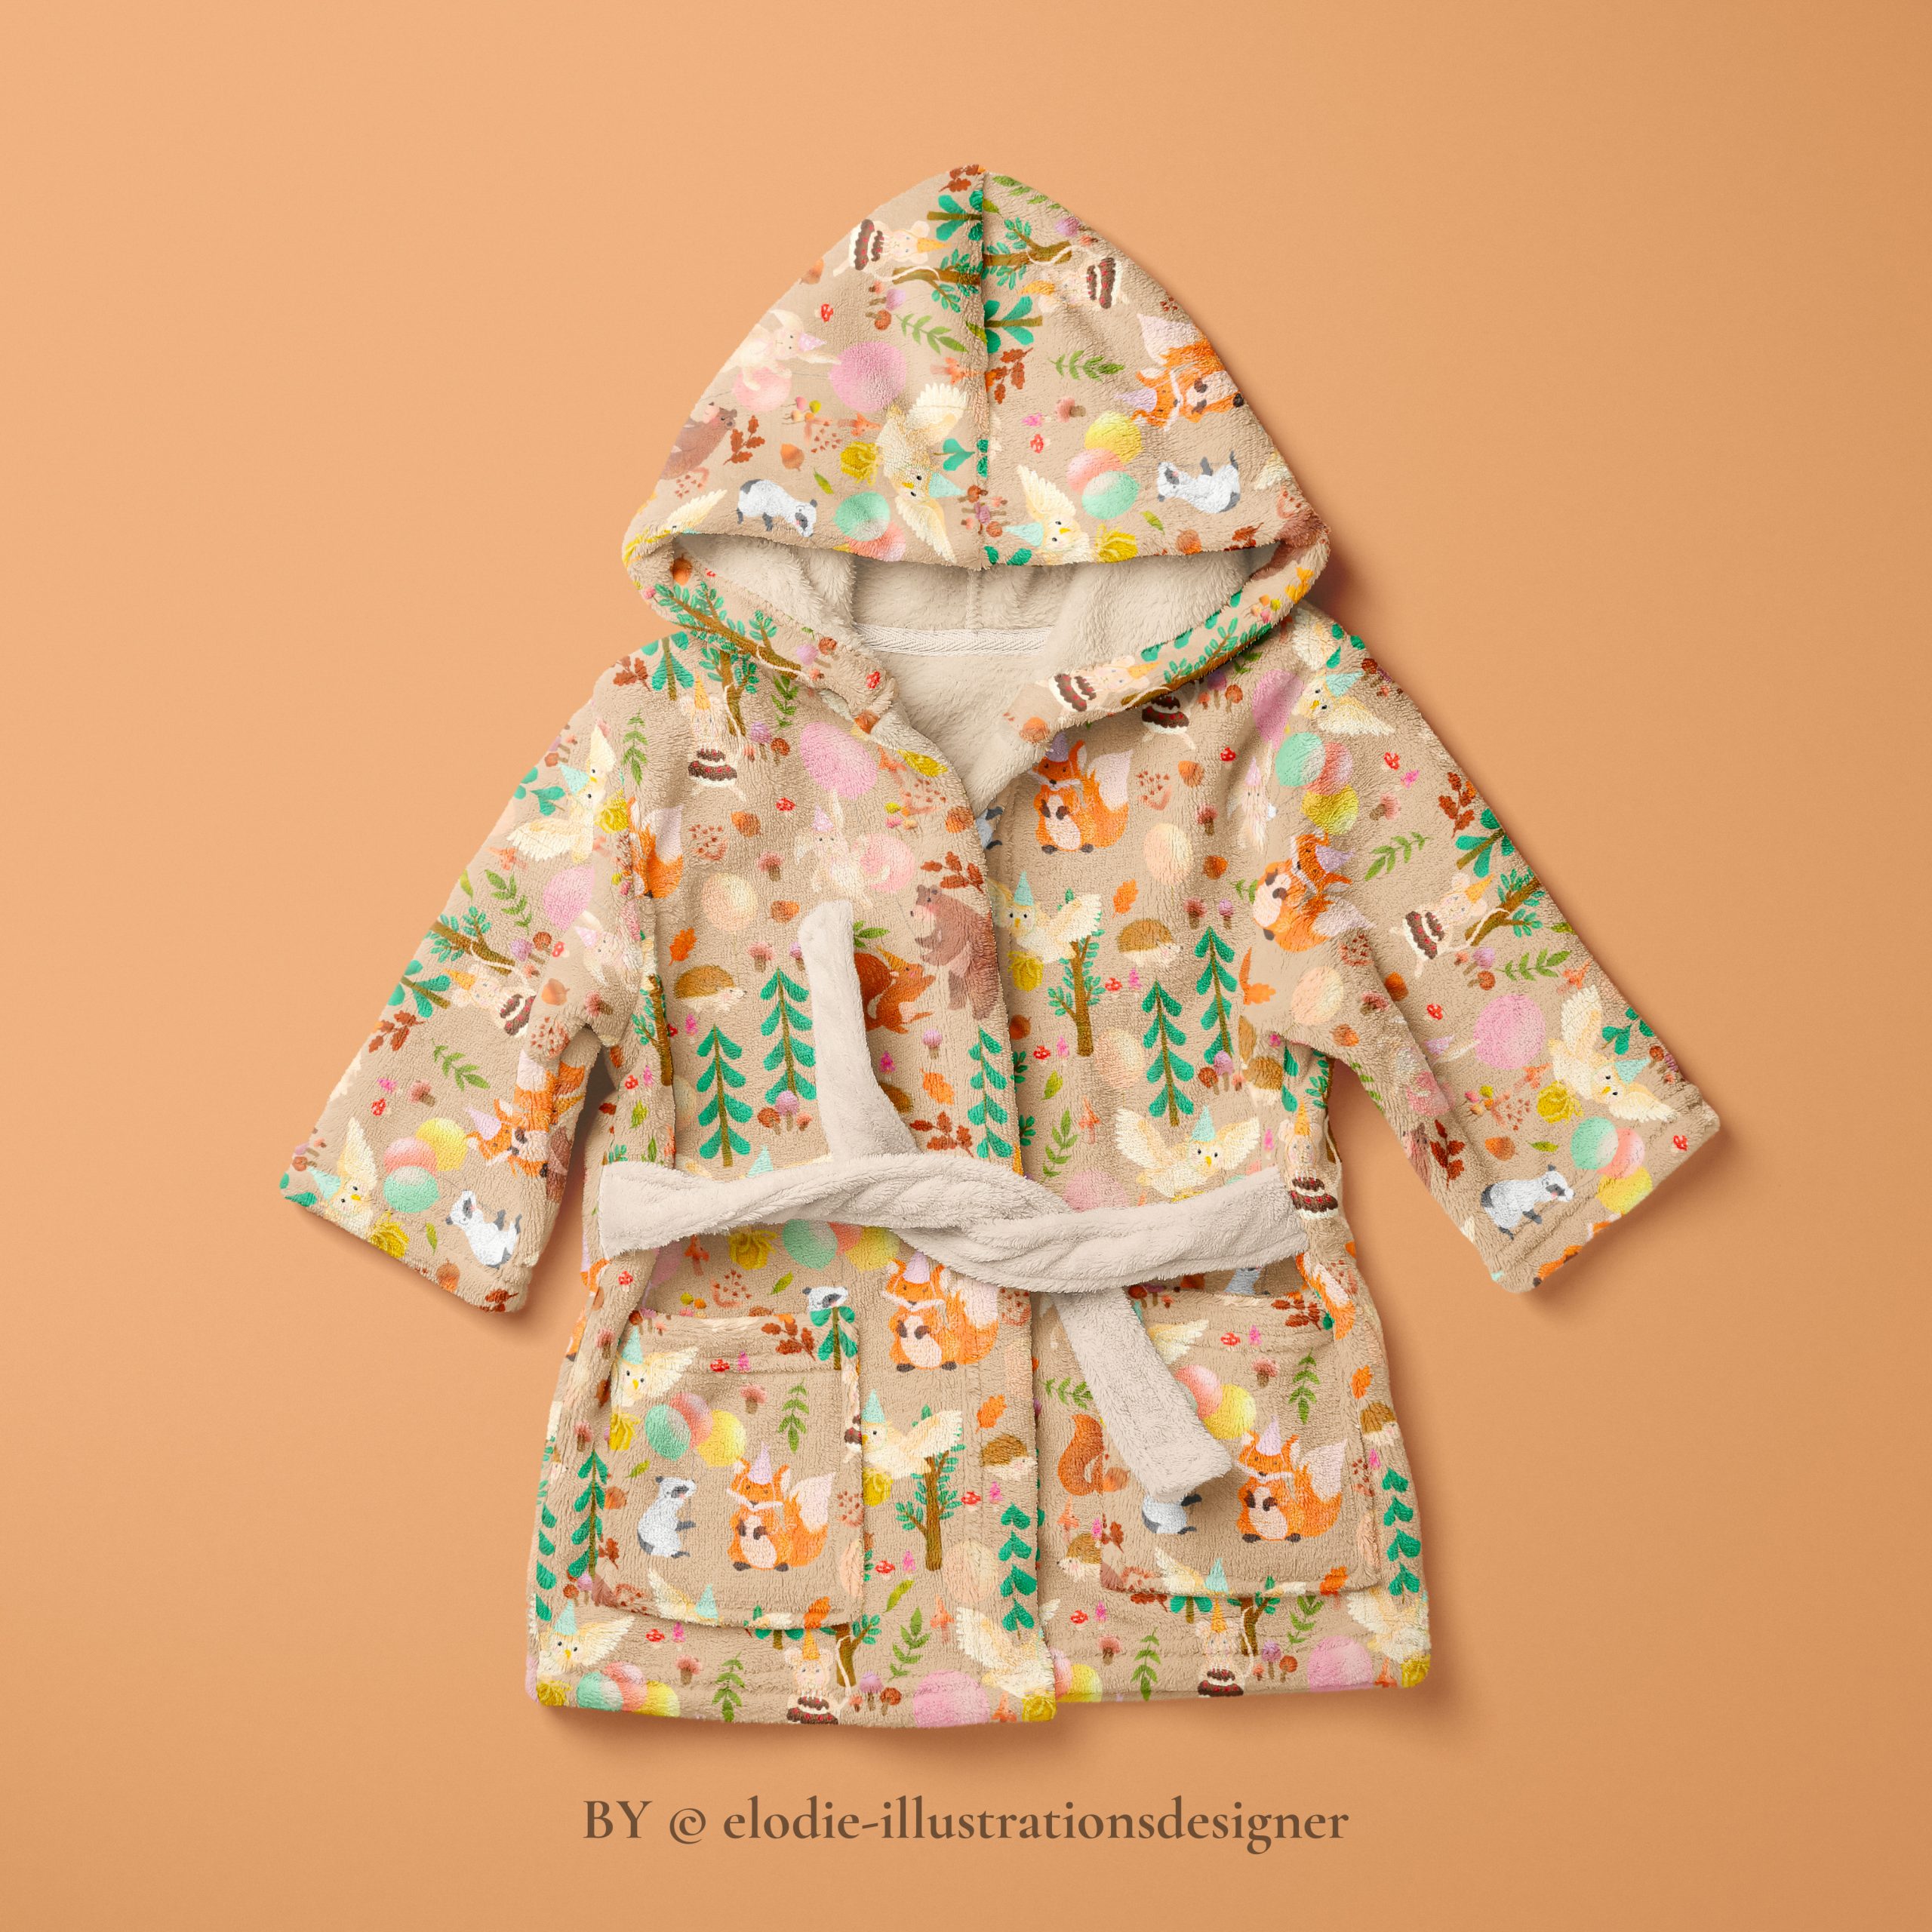 TEXTILES PATTERNS  "WOODLAND BIRTHDAY COLLECTION"